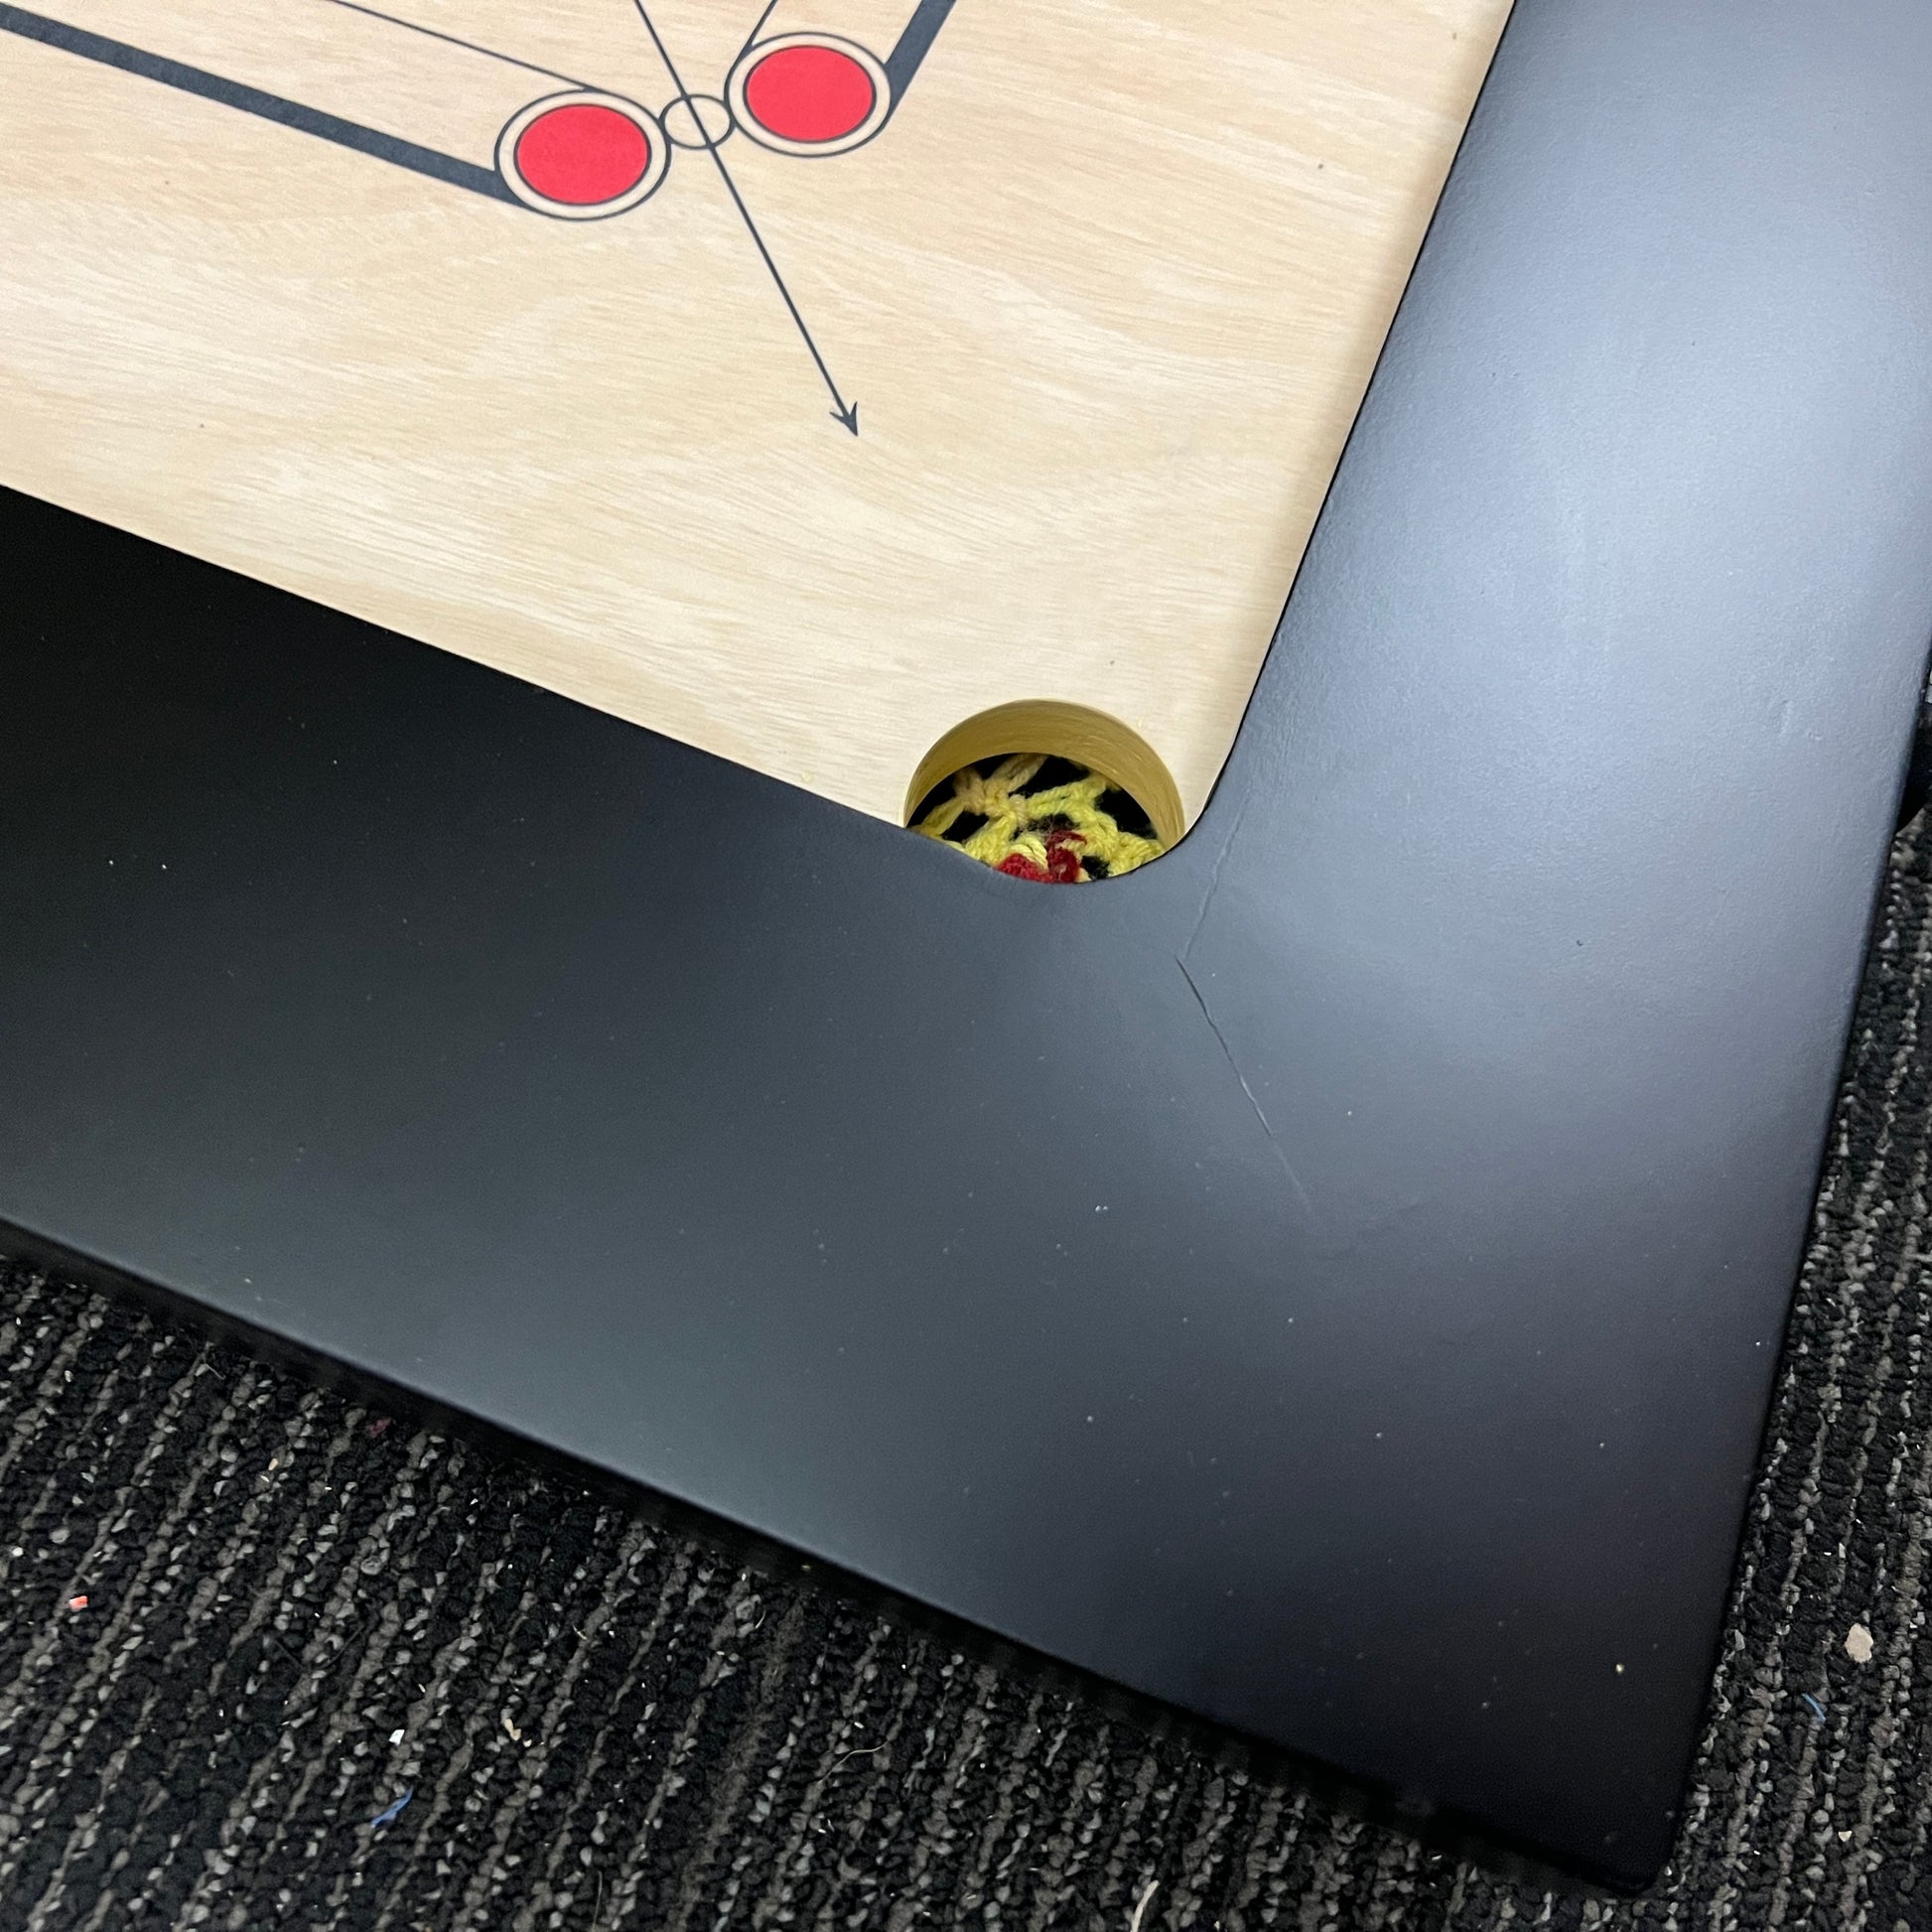 PRECISE Bulldog A-One carrom board, 24mm thick special selected A-One waterproof ply, 37x37 inches overall with a 29x29 inch playing area and 4-inch borders. Comes with a striker and set of coins, approved for use in state ranking tournaments